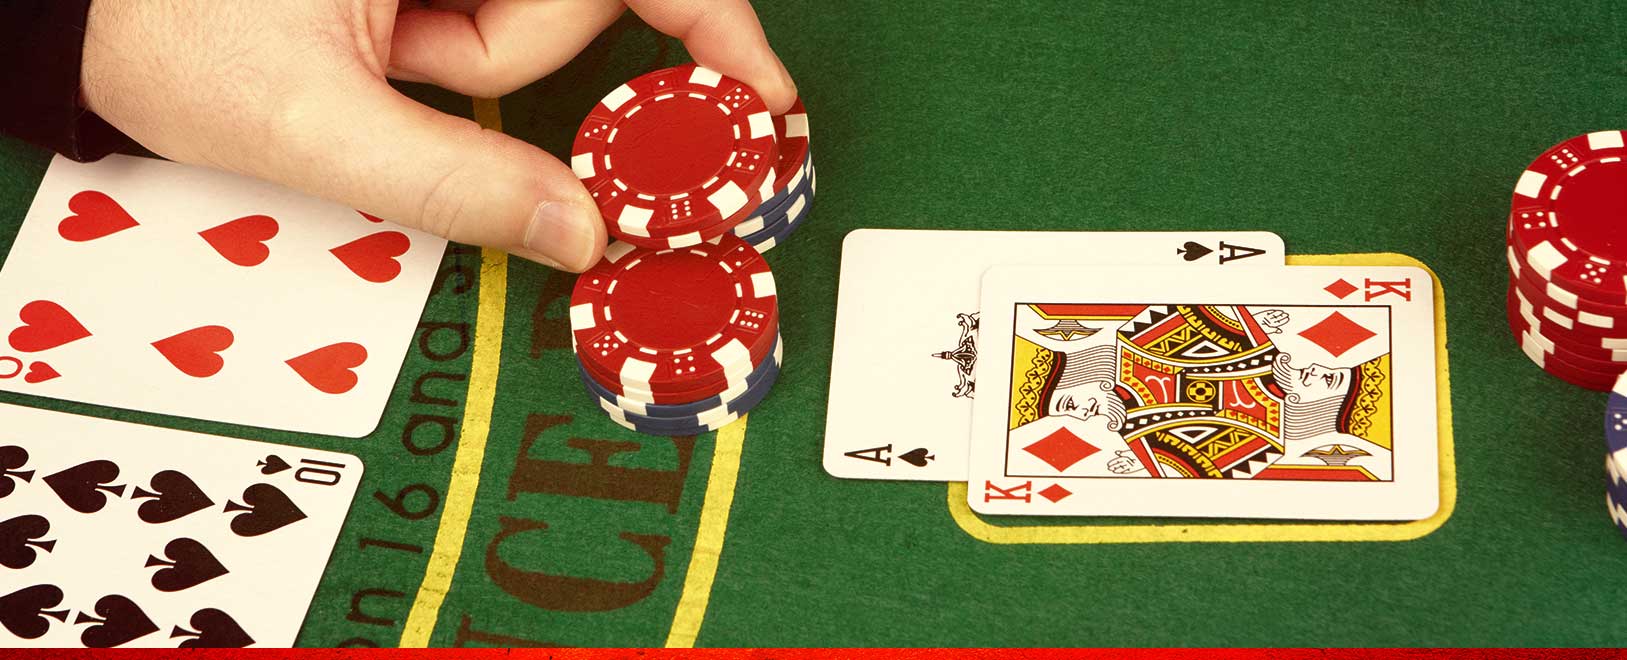 How to double down and split in blackjack machine